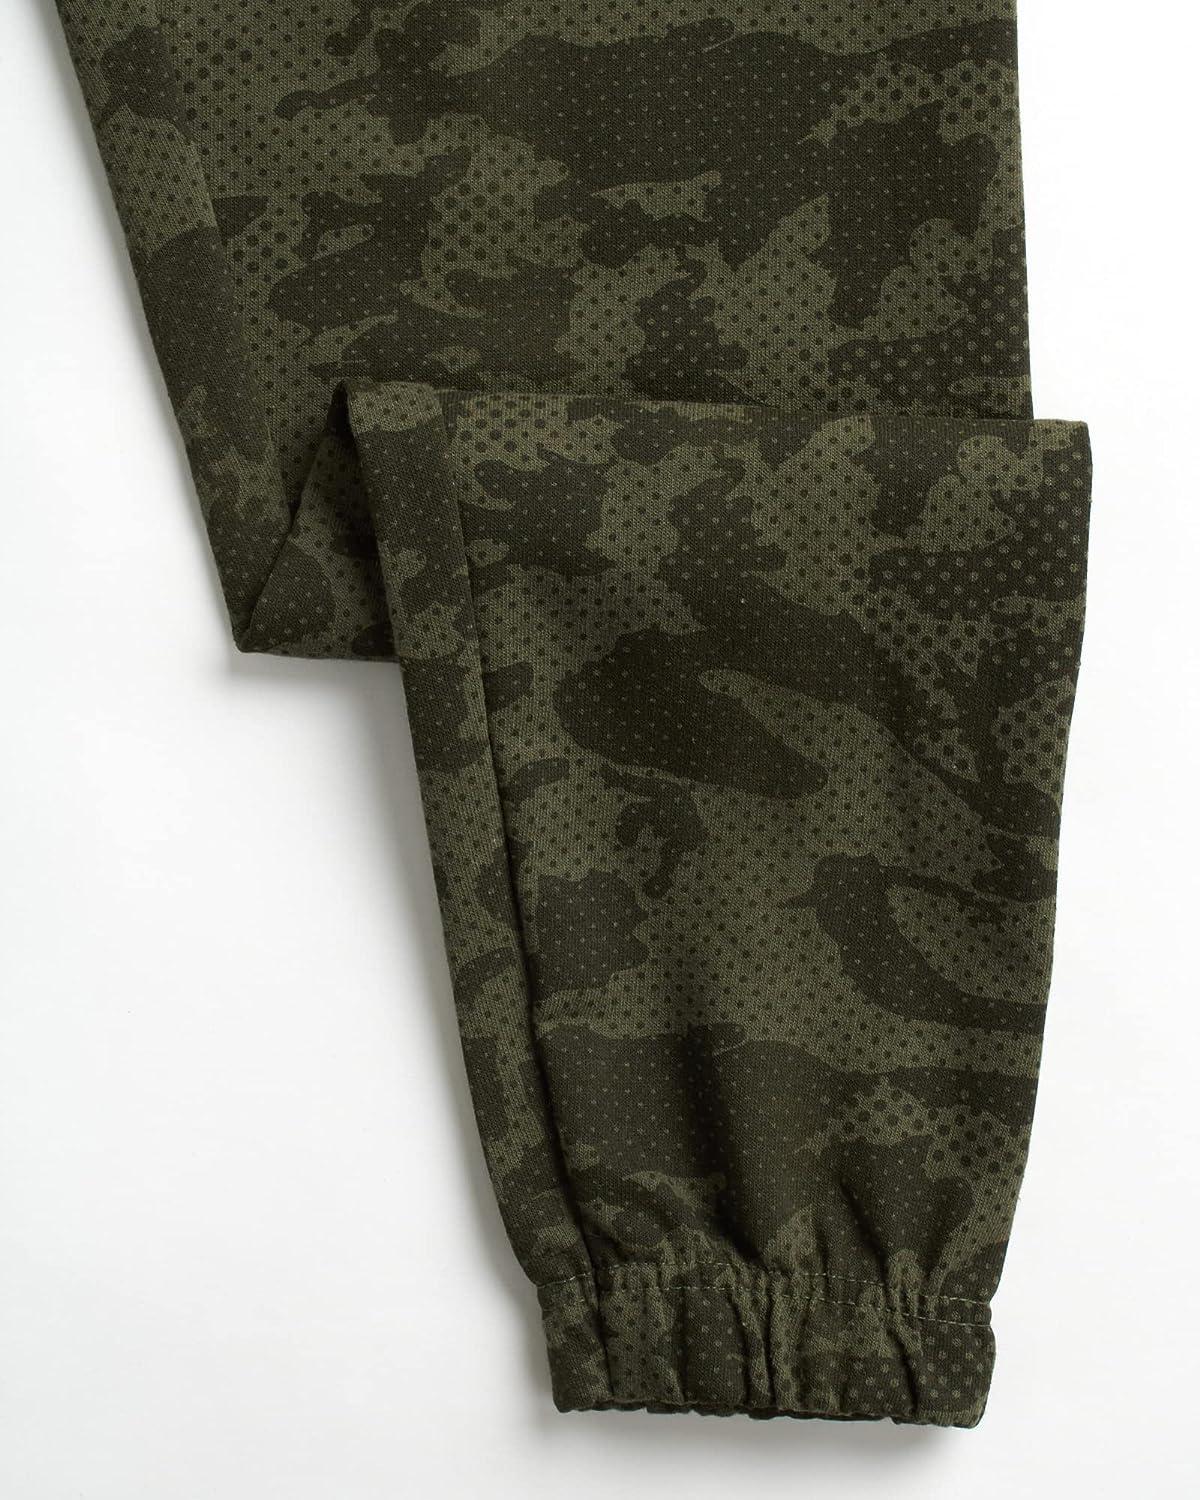 RBX Boys' Sweatpants - 4 Pack French Terry Active Jogger Pants (Size: 8-20)  Grey Camo/Green Camo 14-16